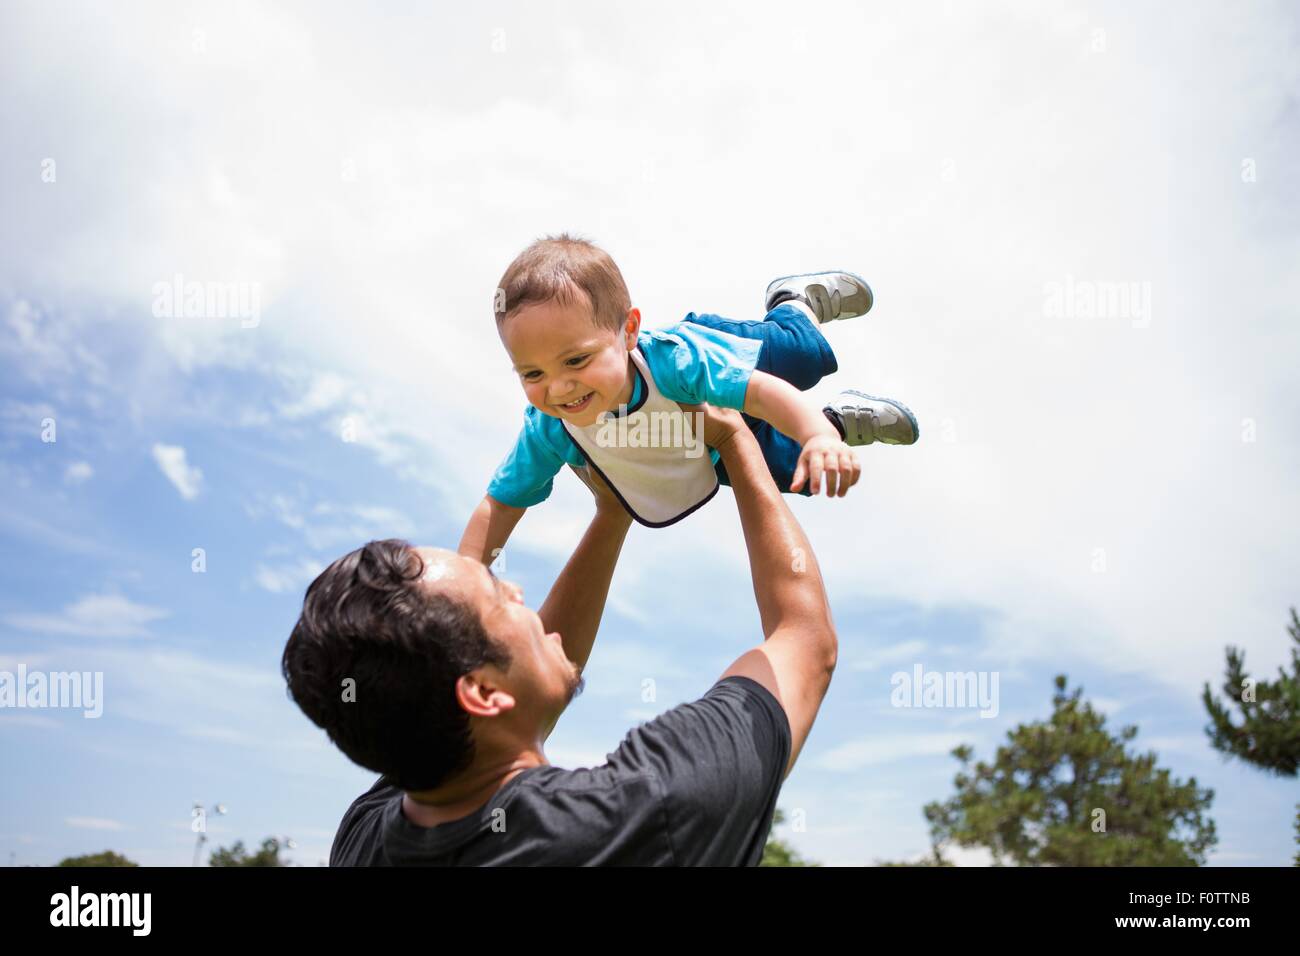 Young man playing lifting up toddler brother in park Stock Photo